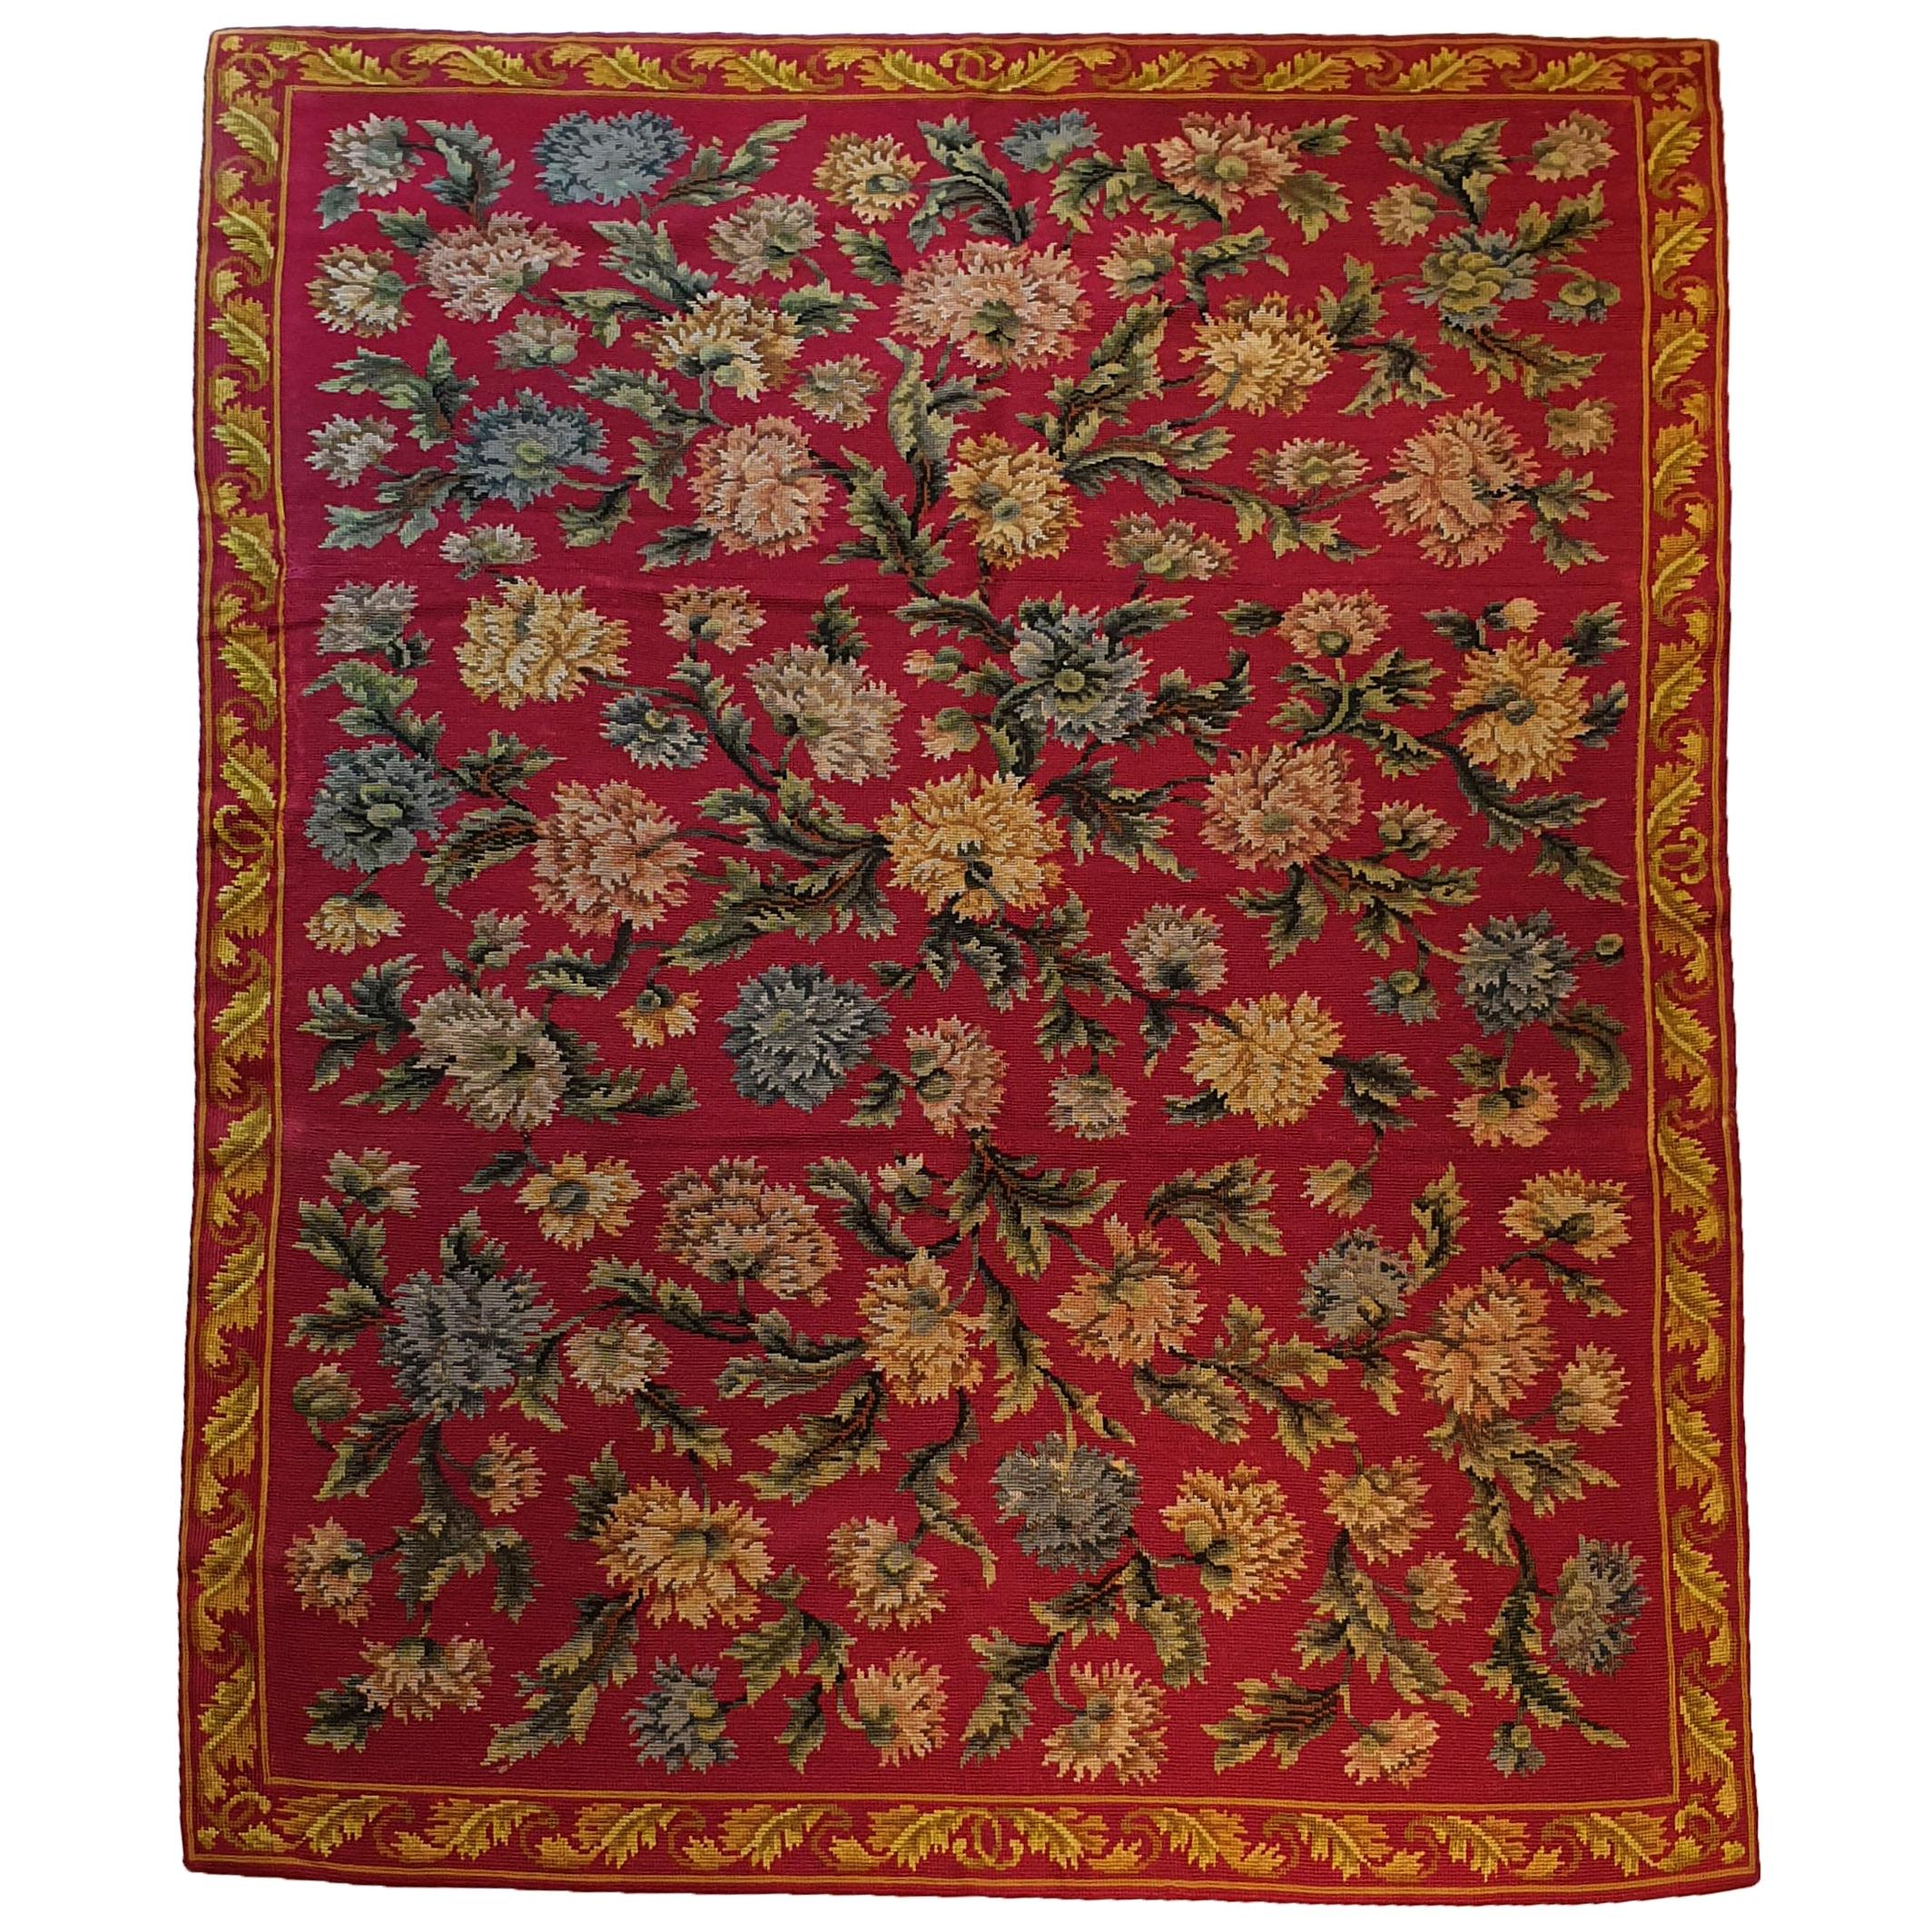 669 -  19th Century Needlepoint Rug Floral